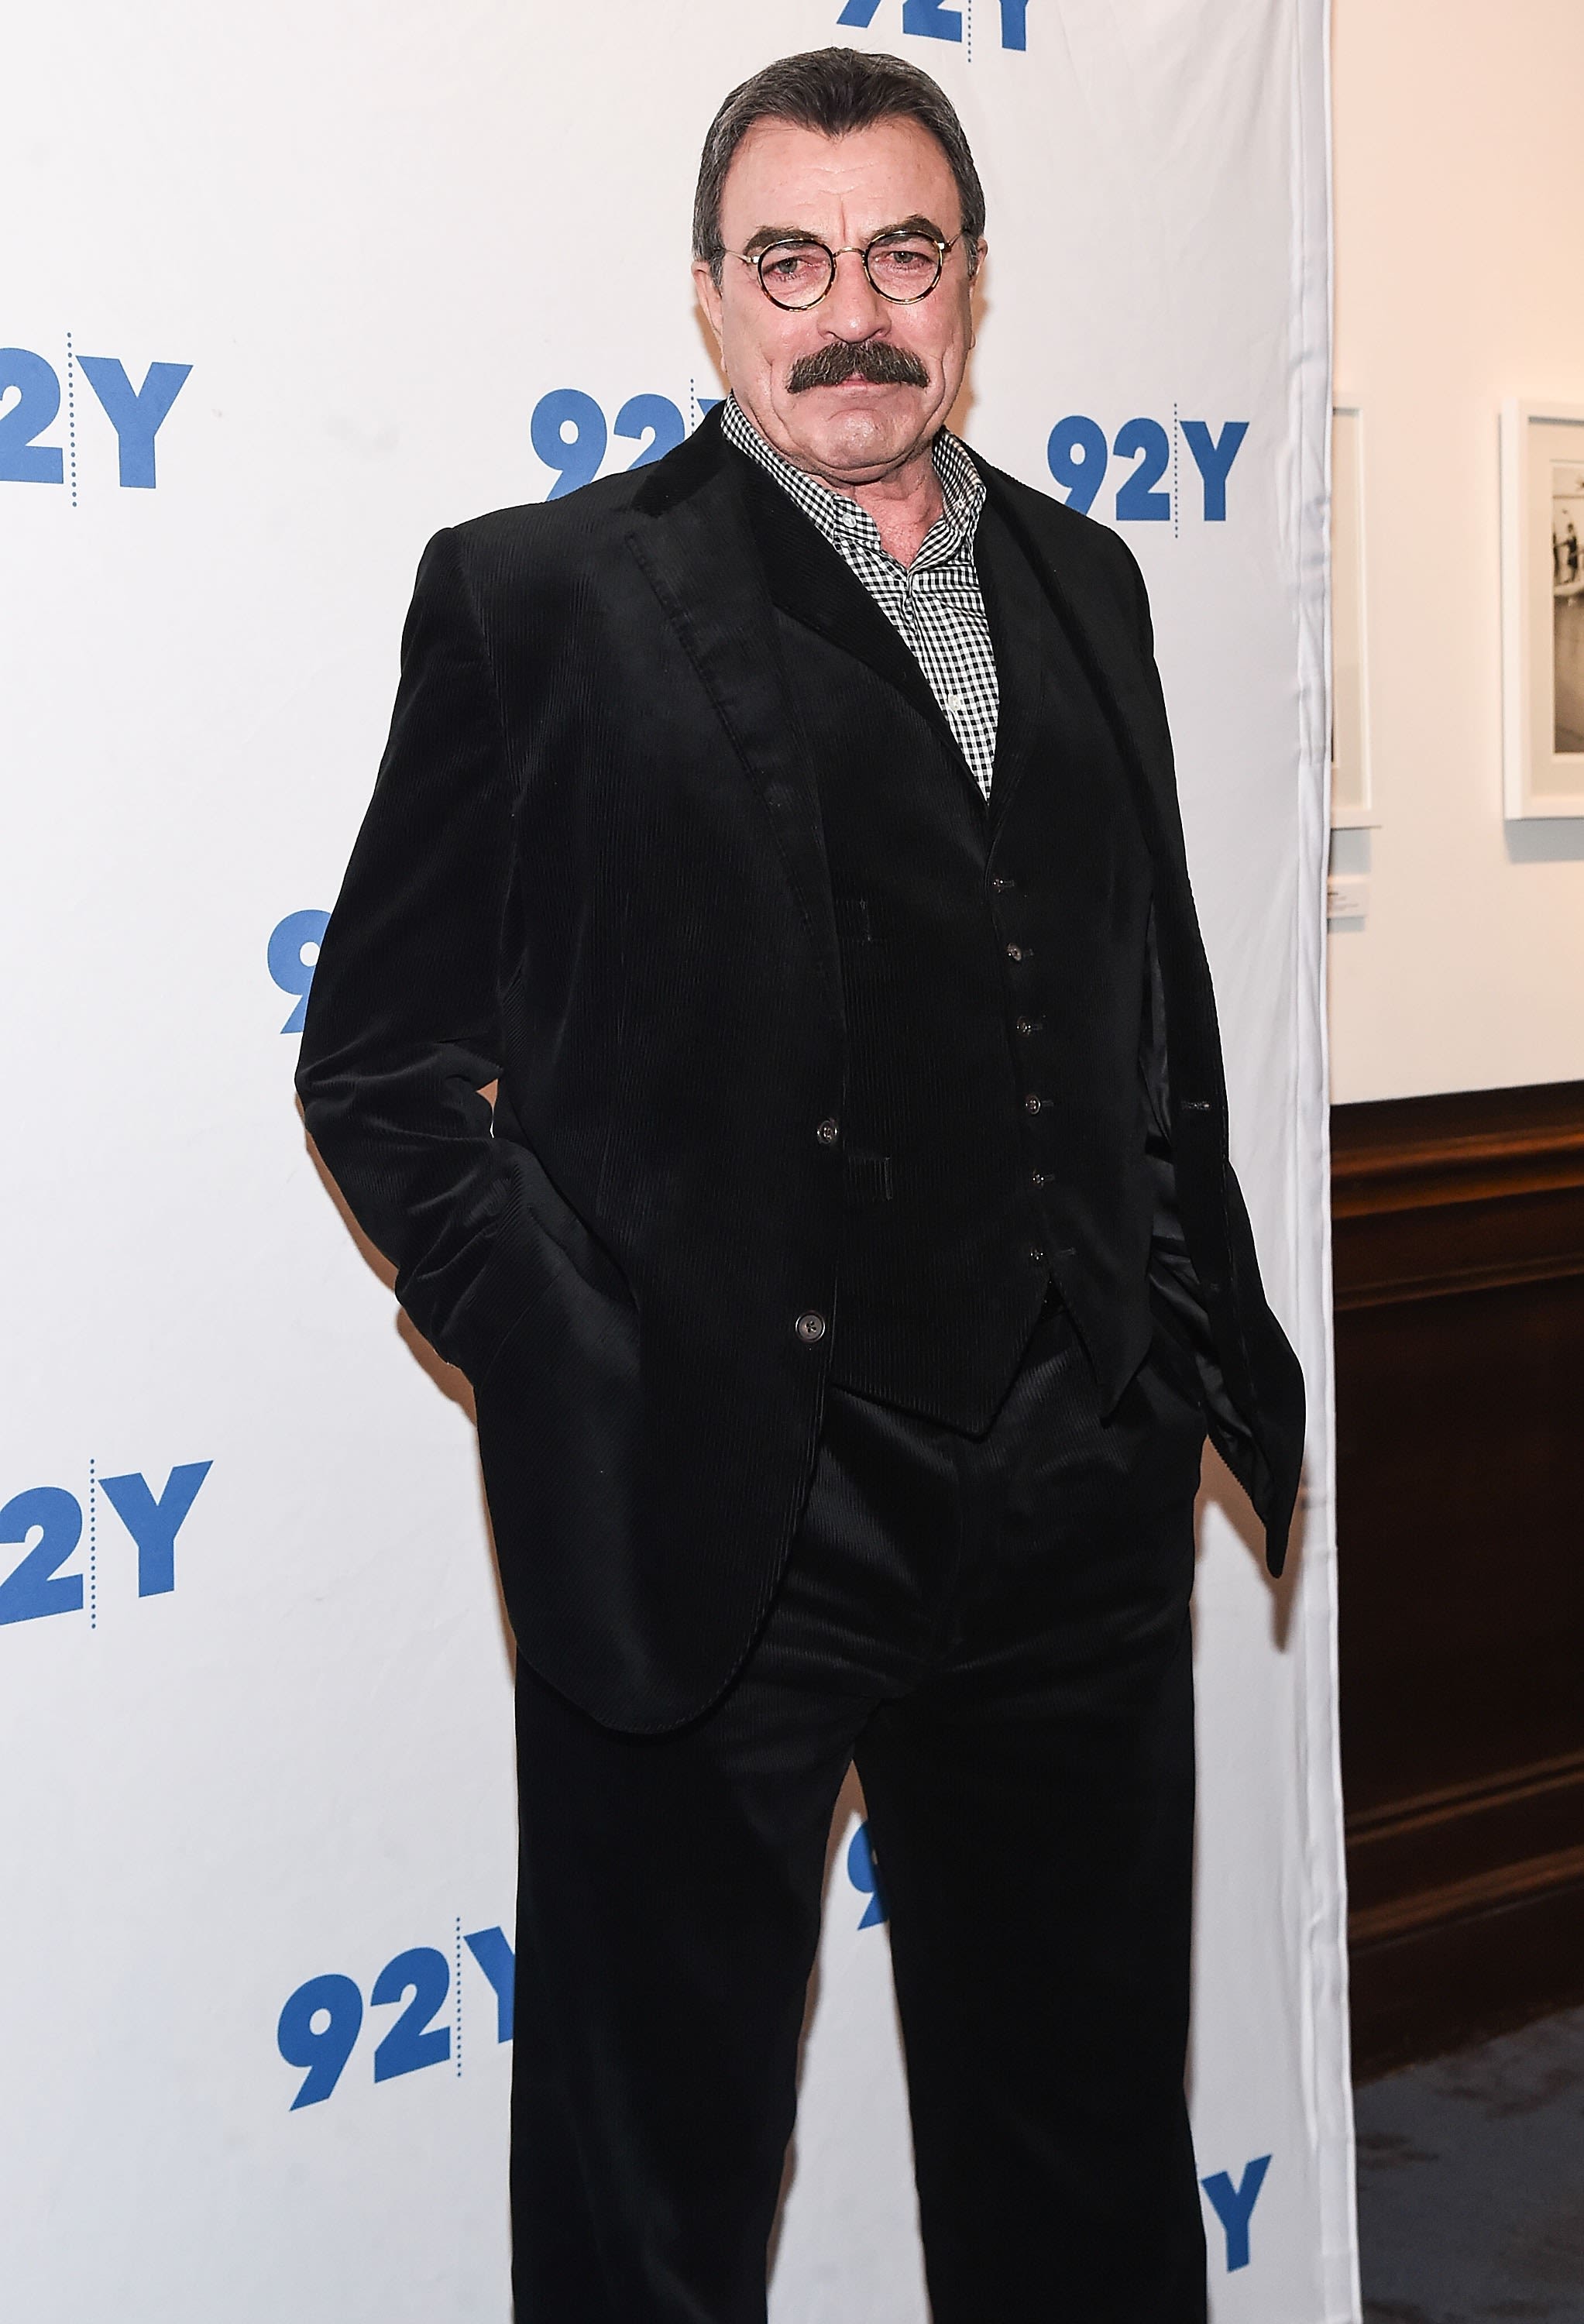 Tom Selleck Has Earned Quite a Fortune in Hollywood! See the ‘Blue Bloods’ Star’s Net Worth